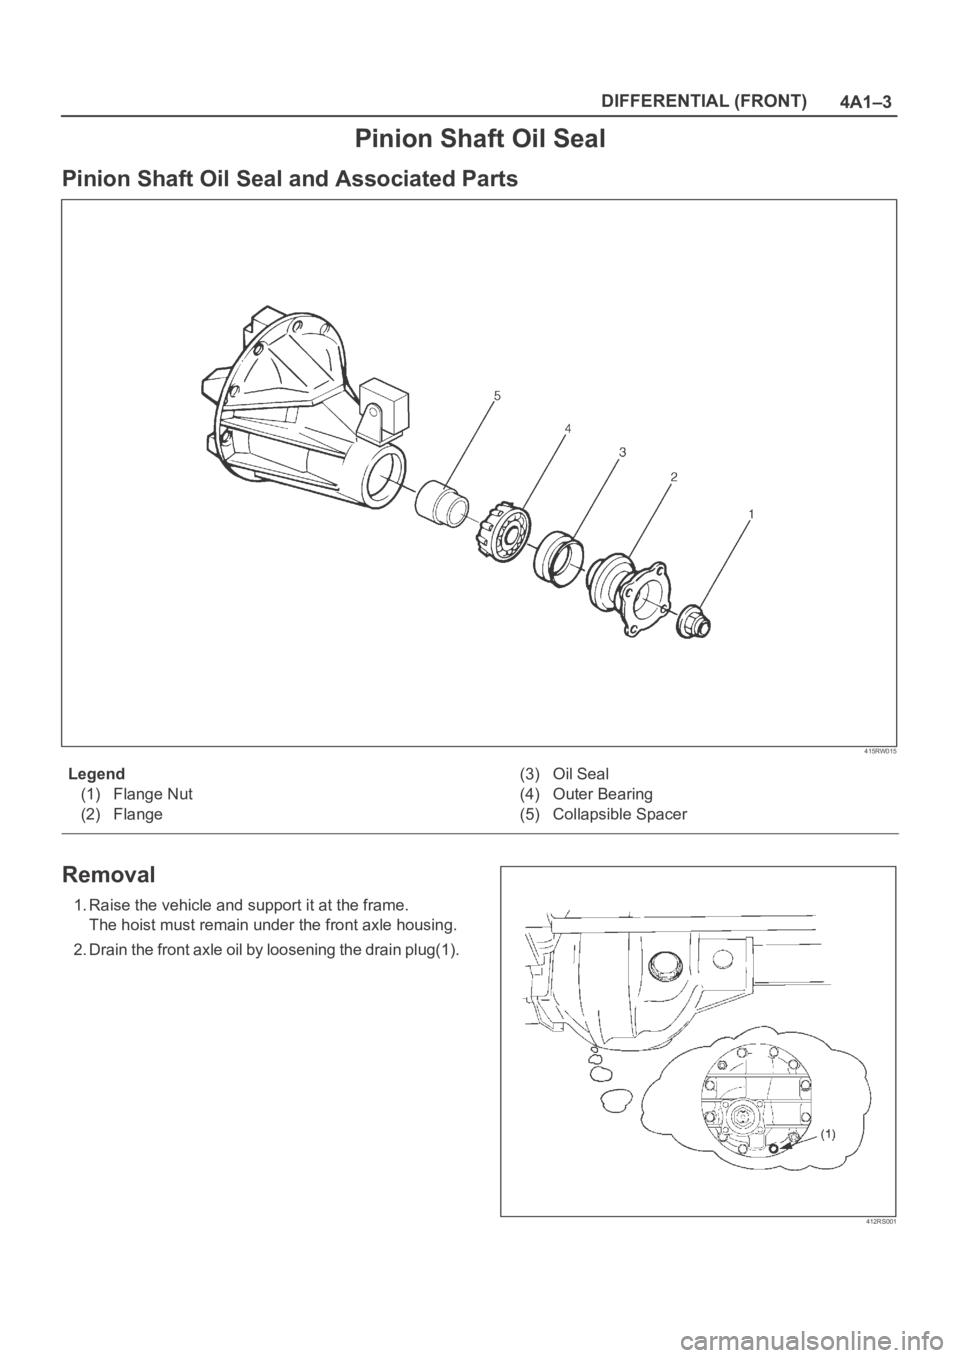 OPEL FRONTERA 1998  Workshop Manual 4A1–3 DIFFERENTIAL (FRONT)
Pinion Shaft Oil Seal
Pinion Shaft Oil Seal and Associated Parts
415RW015
Legend
(1) Flange Nut
(2) Flange(3) Oil Seal
(4) Outer Bearing
(5) Collapsible Spacer
Removal
1. 